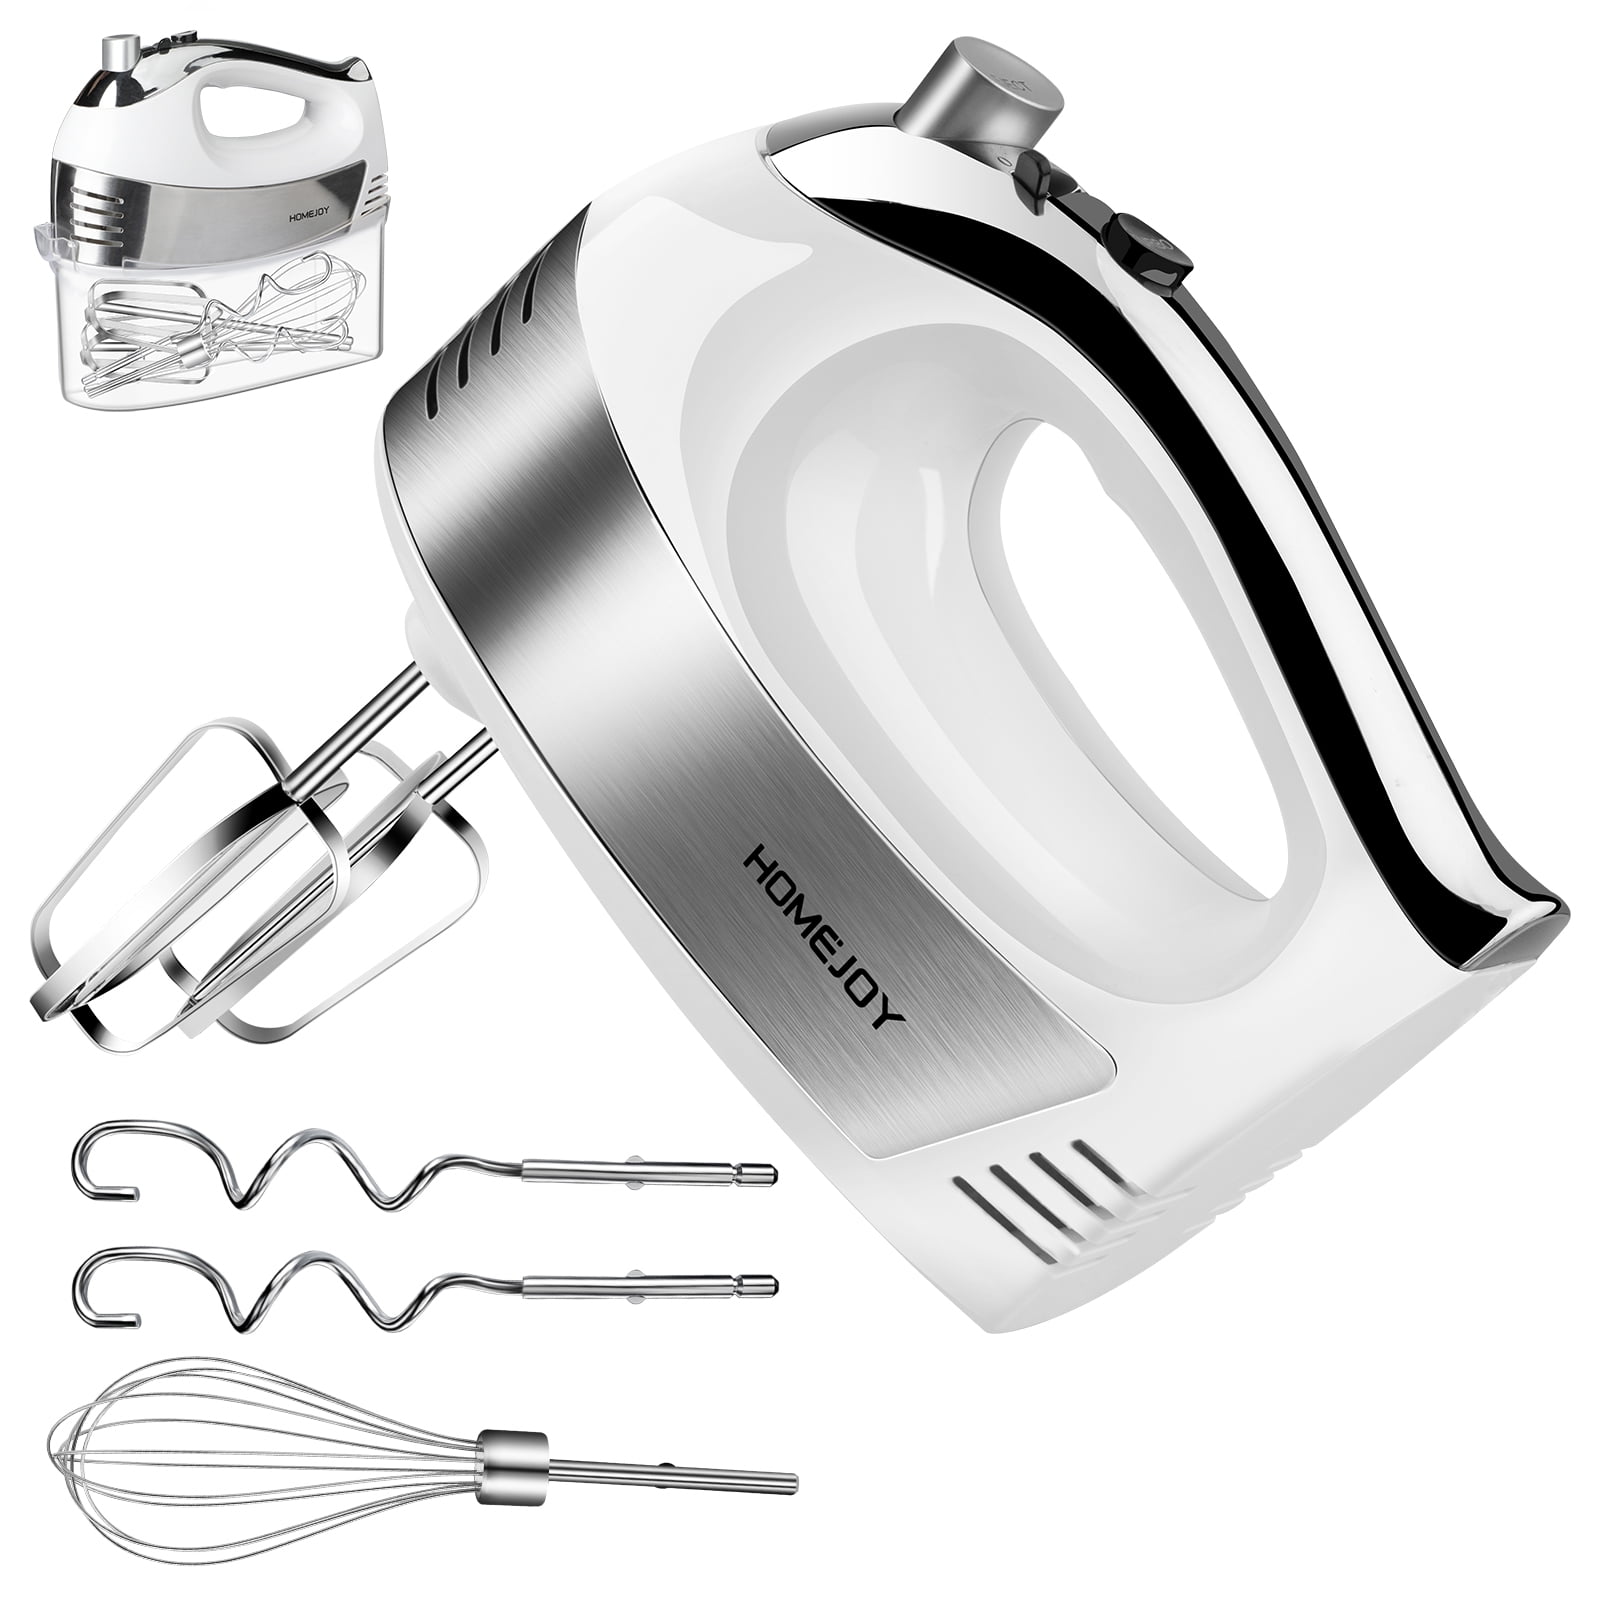 Conlida Hand Mixer Electric Upgraded Kitchen Handheld Mixer for Baking Cake Egg Cream Food Beater Turbo Boost / Self-Control Speed + 5 Speed + Eject B